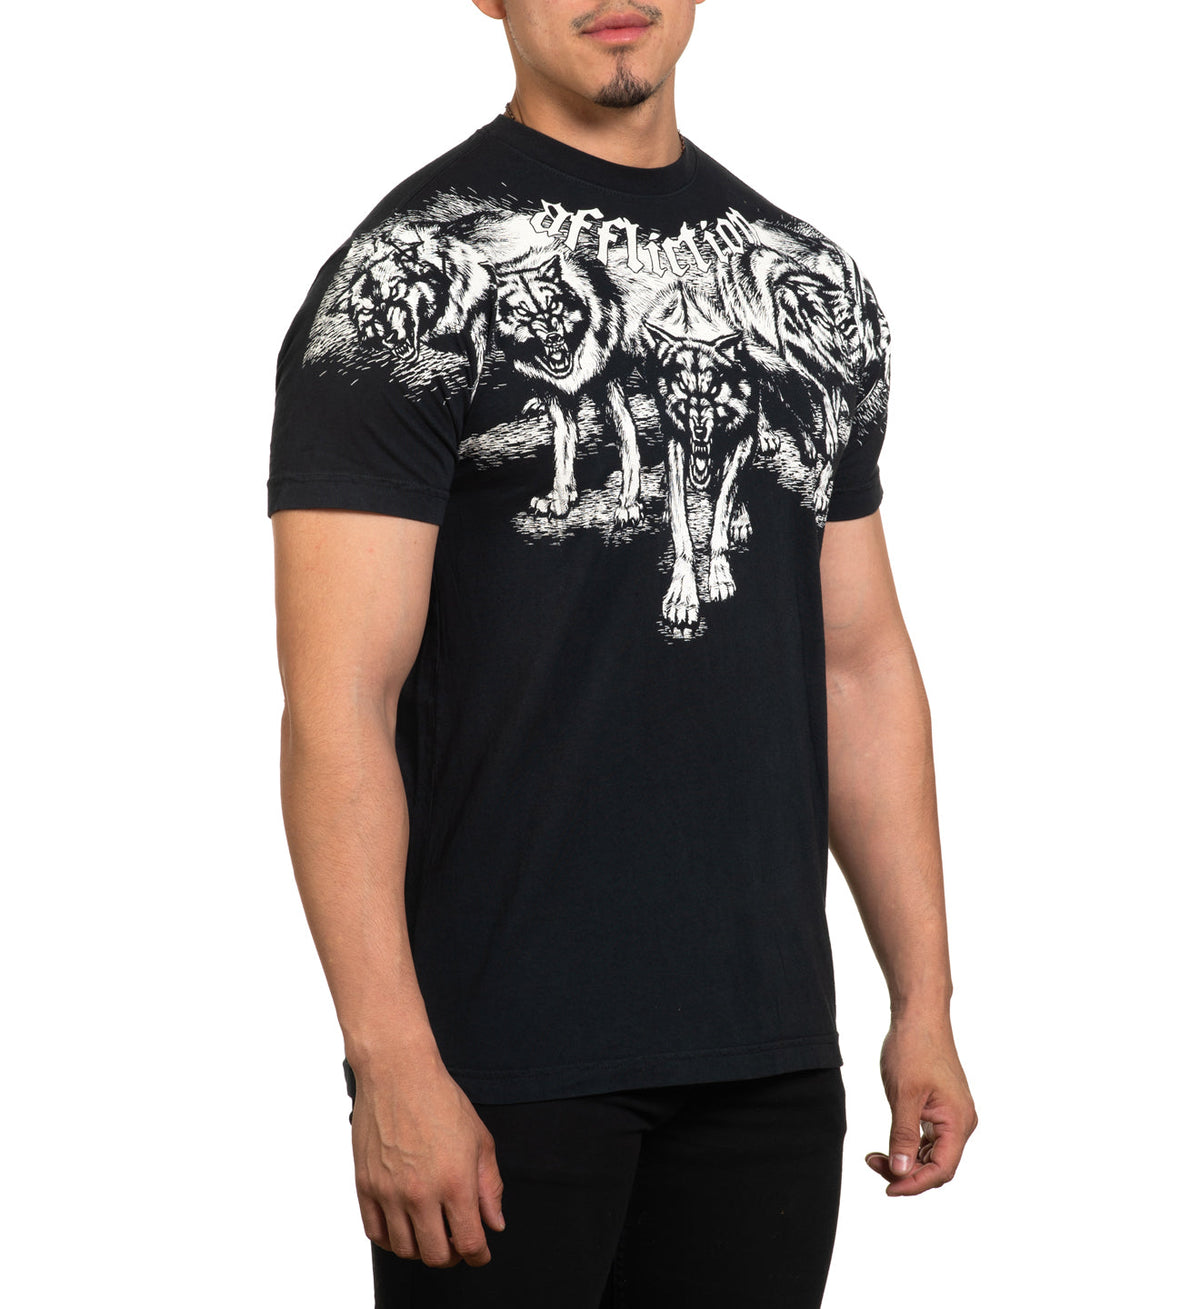 Wolves - Affliction Clothing